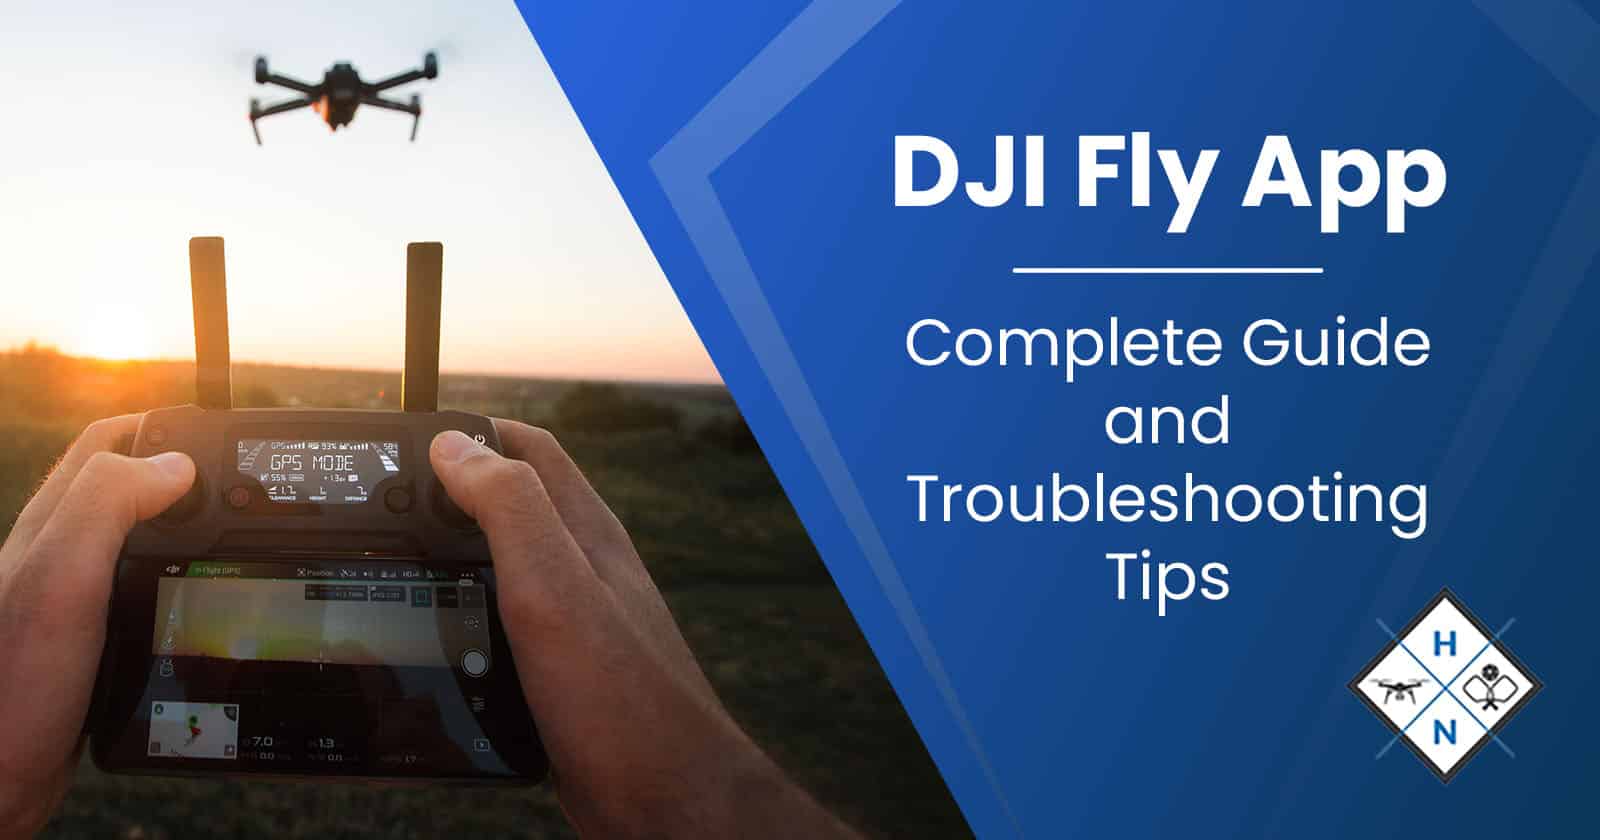 DJI Fly App – Complete Guide and Troubleshooting Tips